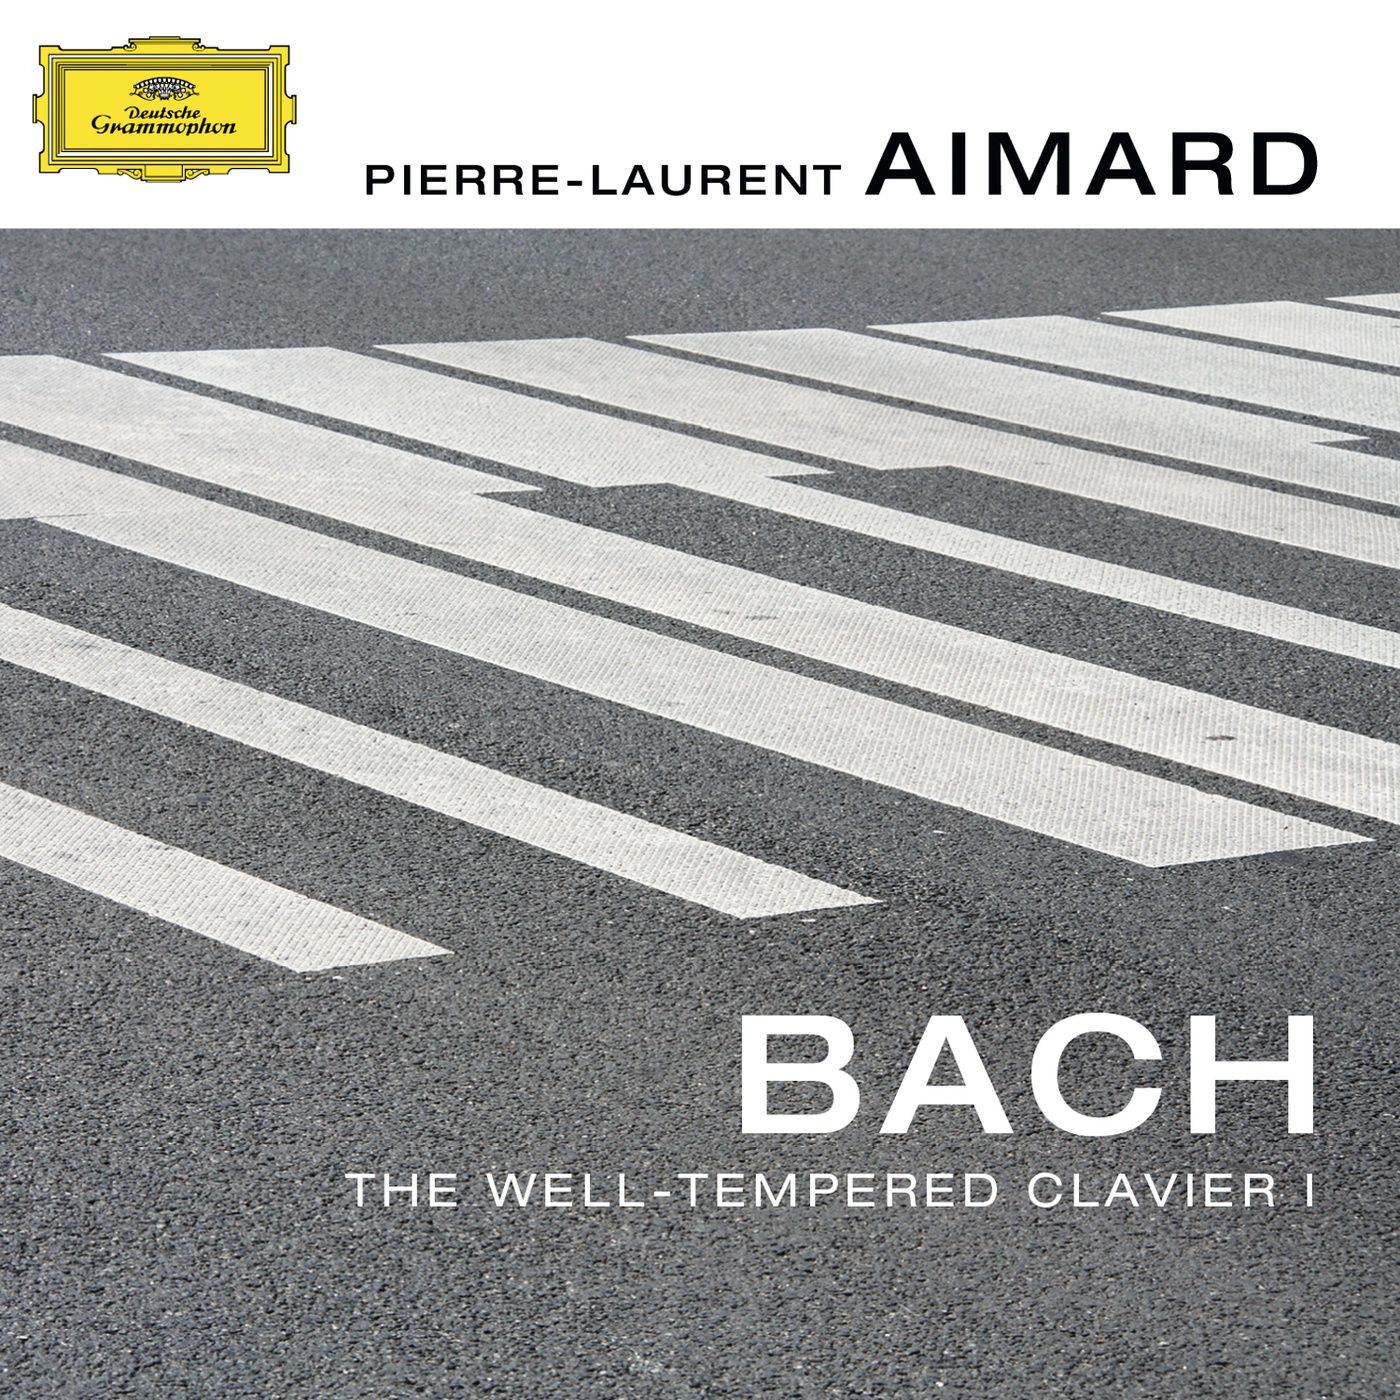 J.S. Bach: Prelude & Fugue In A Major (Well-Tempered Clavier, Book I, No.19), BWV 864 - 1. Prelude